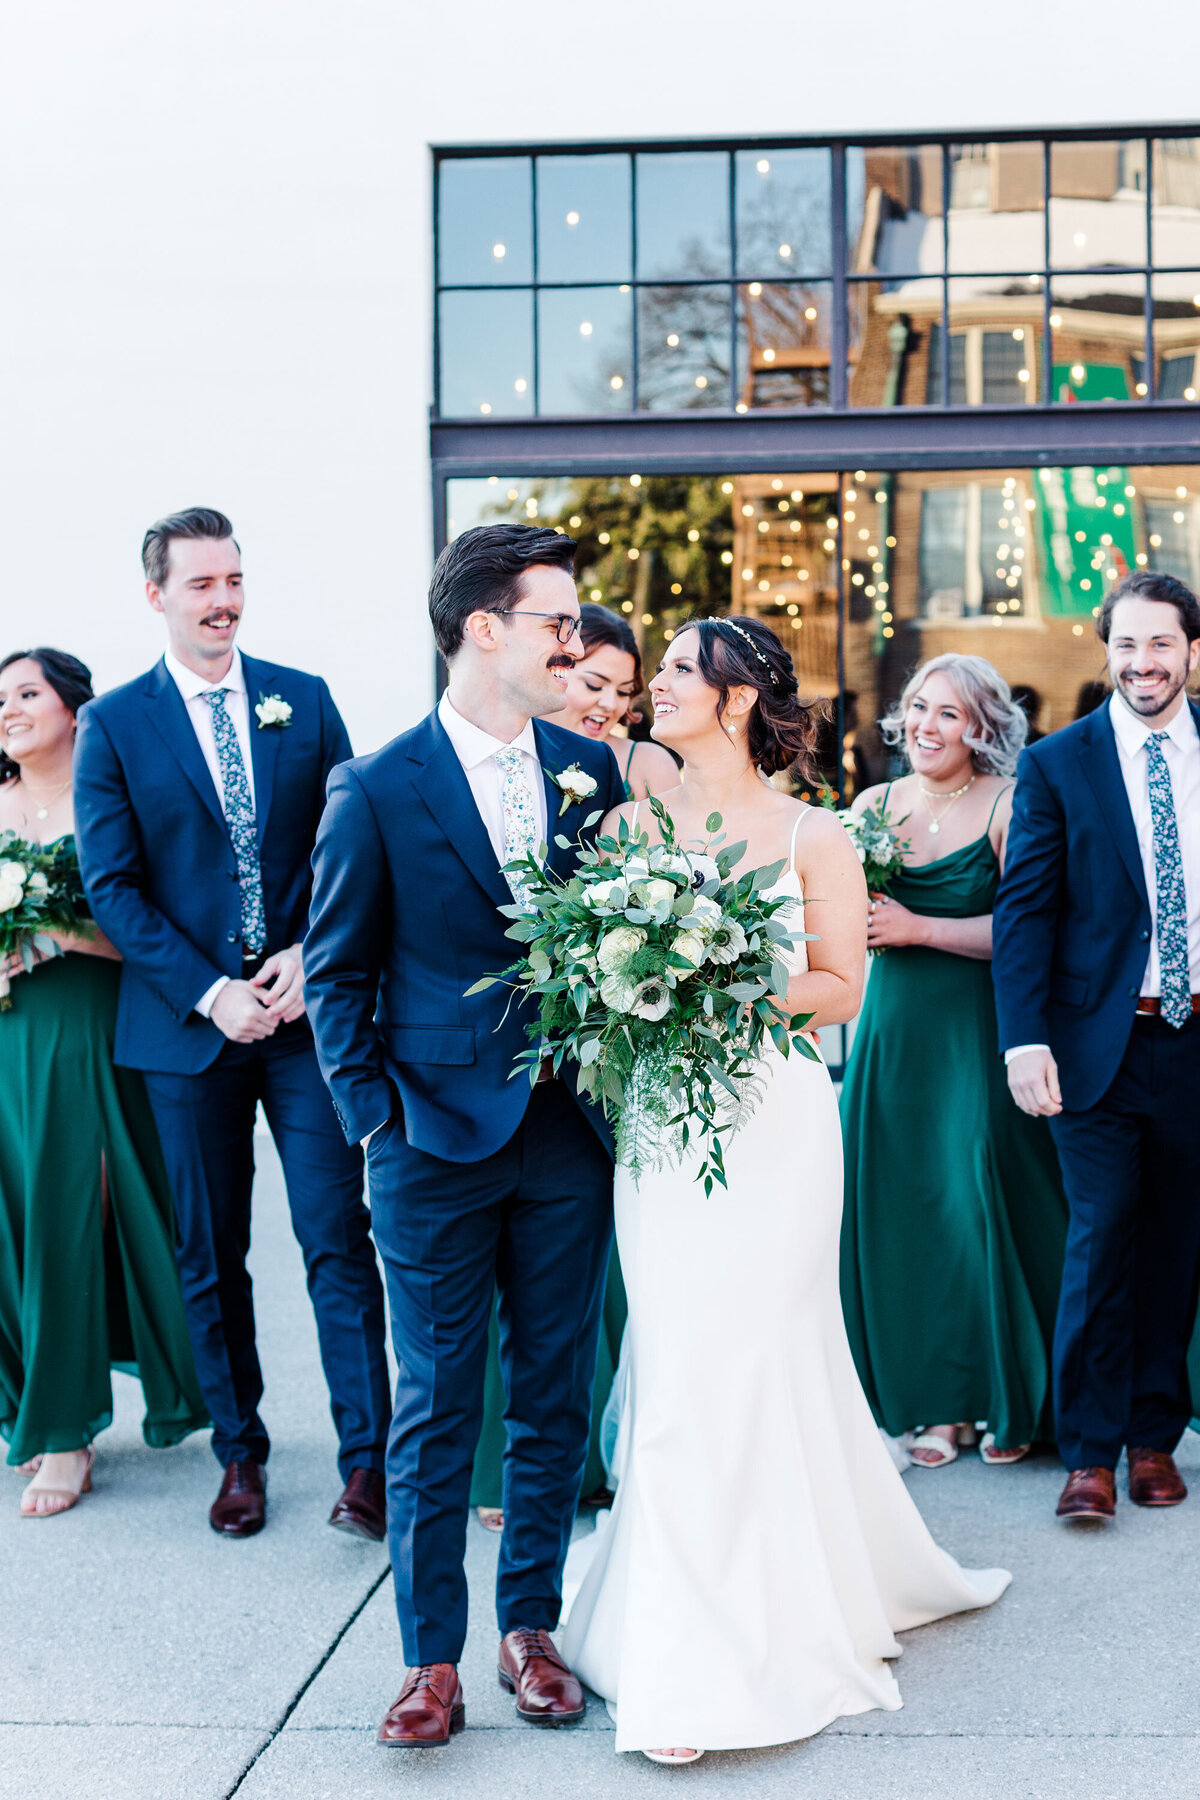 wedding couple and bridal party walking together